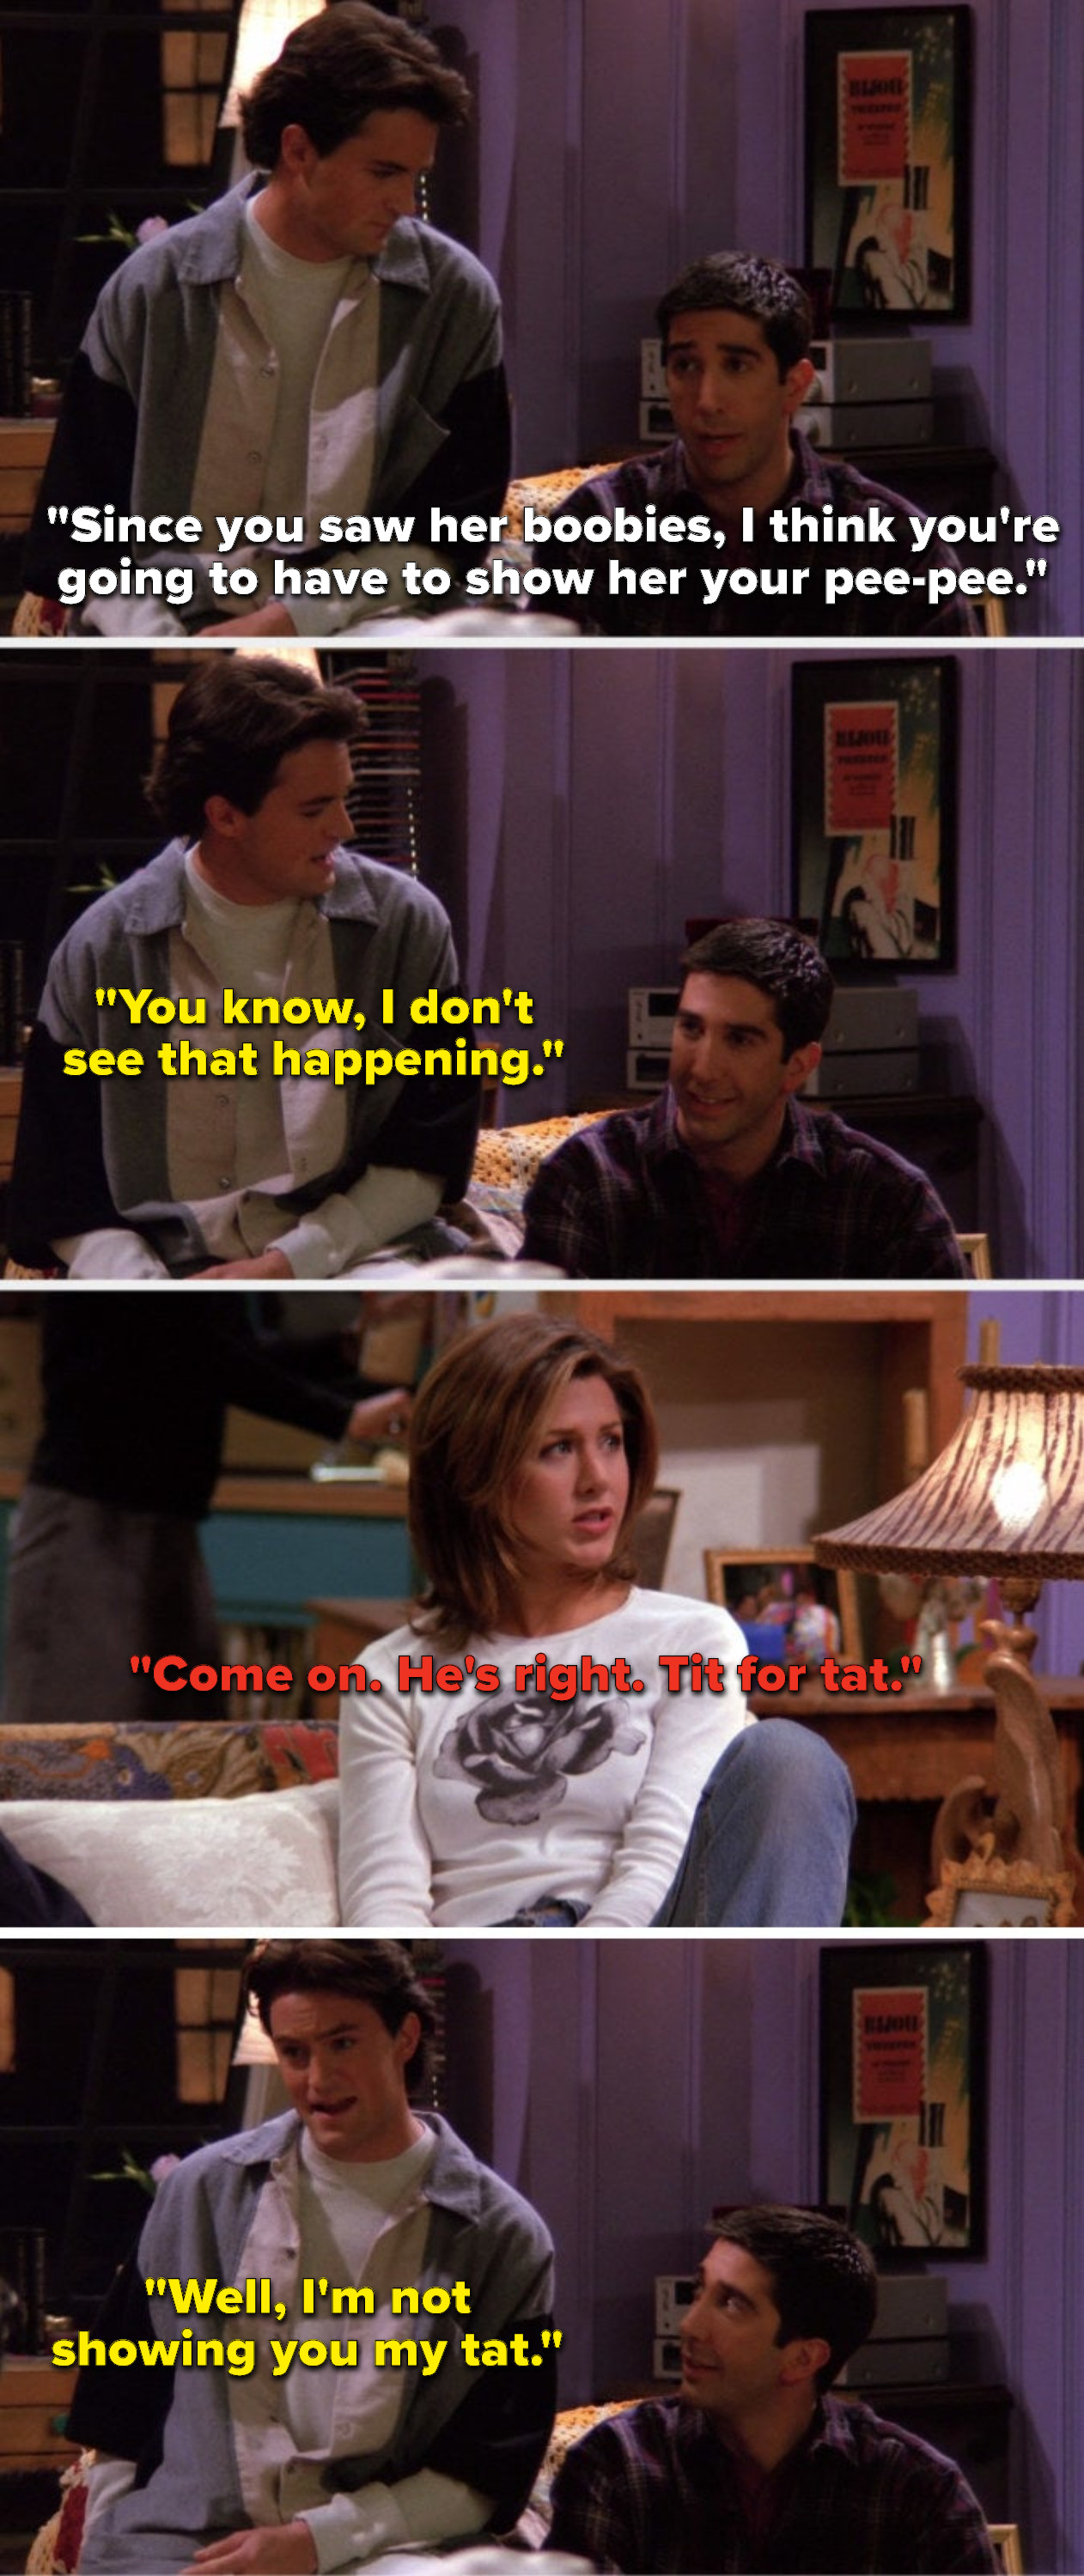 Ross says to Chandler, Since you saw her boobies, I think youre going go have to show her your peepee, Rachel says, Come on, Hes right, tit for tat, and Chandler says, Well, Im not showing you my tat